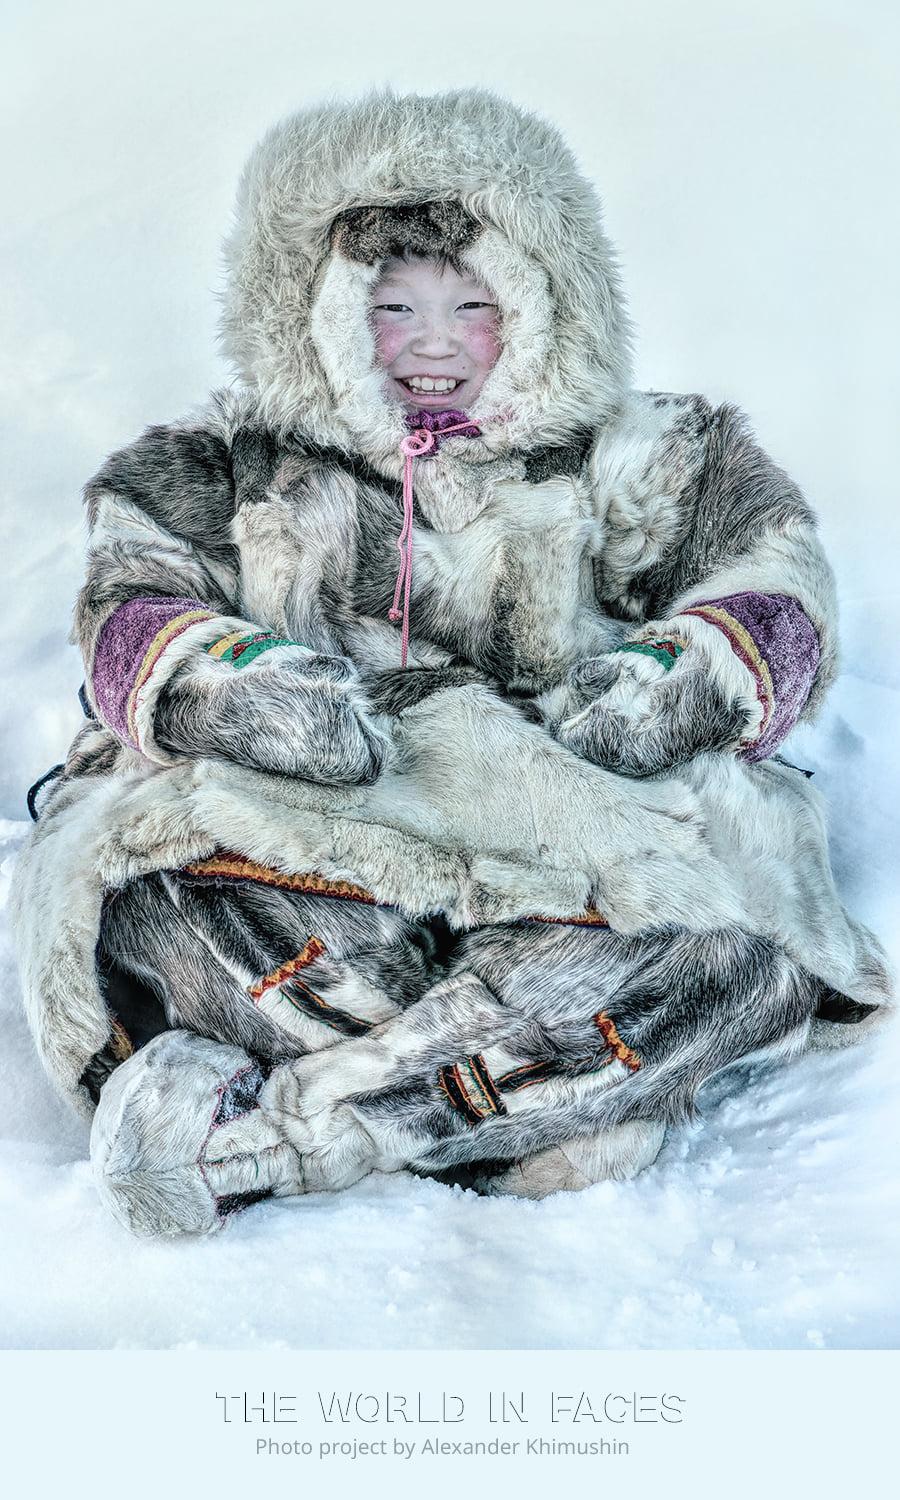 A Nenets indigenous boy at one of the most remote settlements of Taymyr Peninsula (Arctic part of Siberia) (© <a href="https://www.facebook.com/xperimenter">Alexander Khimushin</a> / The World In Faces)